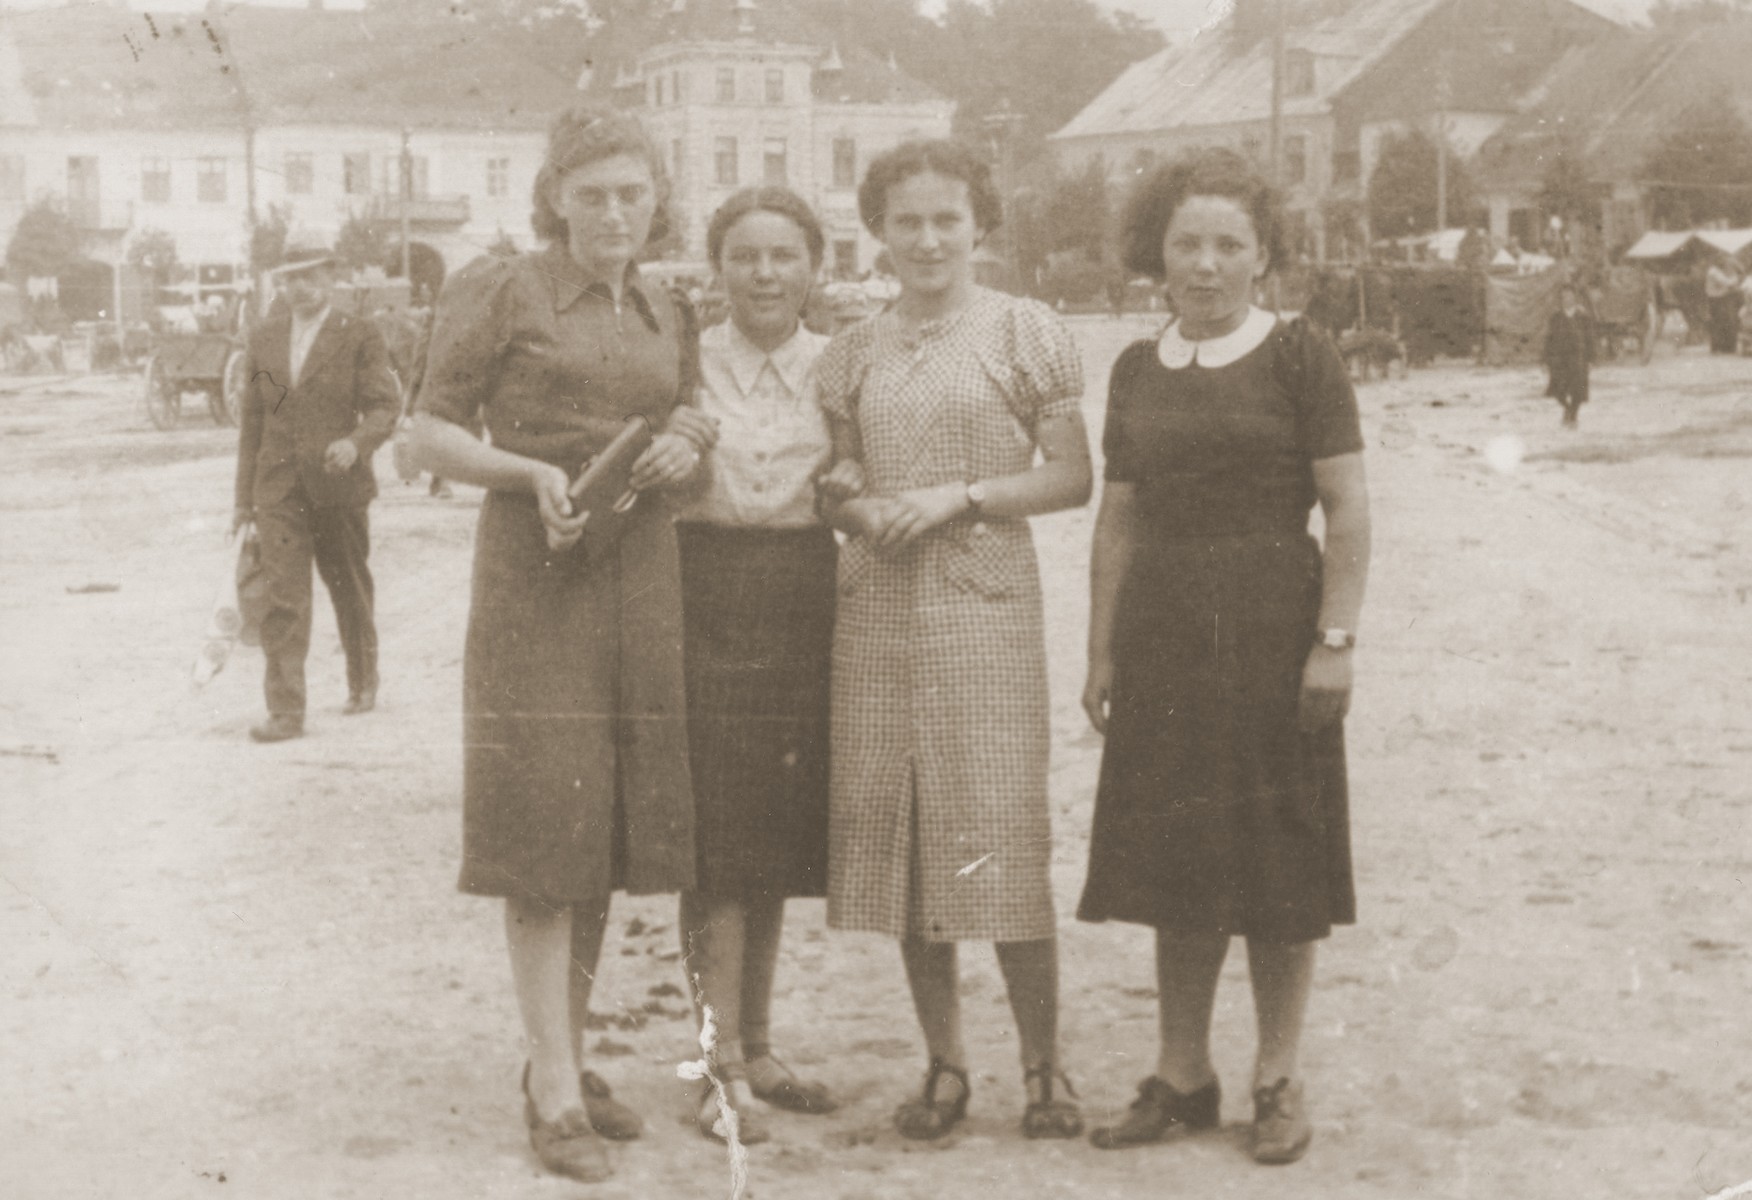 Group portrait of four young Jewish women in a public square in Lancut, Poland.

Pictured from left to right are: Ethel Ringelheim, Sheila Gurfein, Esther Amet and Basia Gurfein.